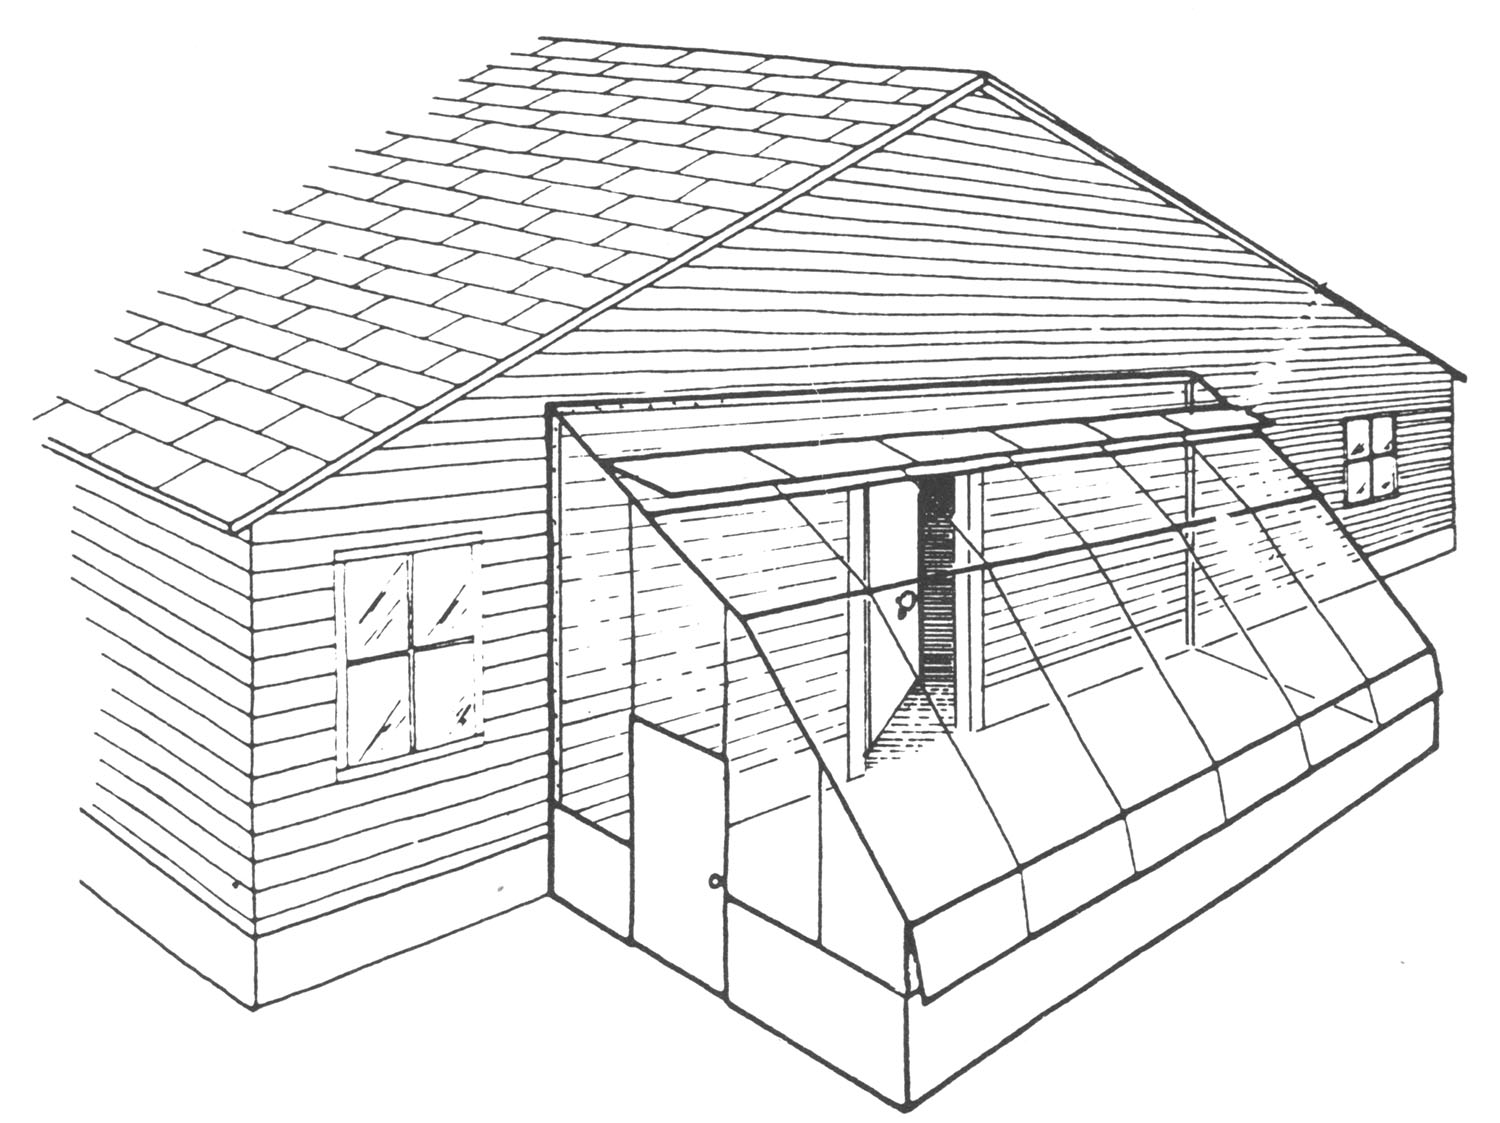 Sketch of an attached lean-to greenhouse.